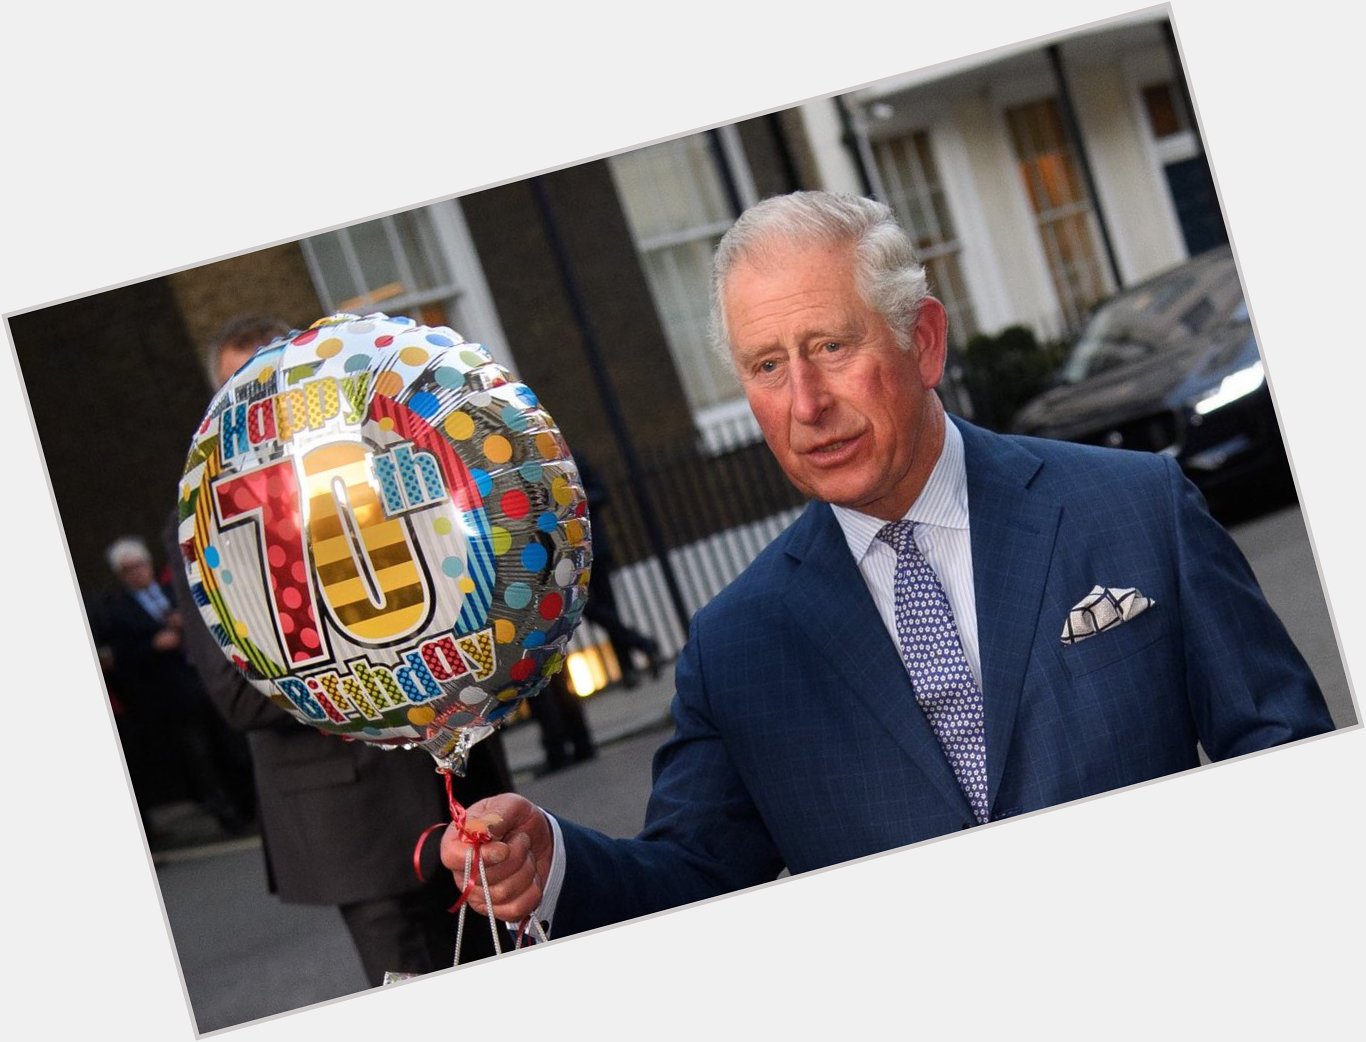 To the man who will be King ... Happy 70th Birthday Prince Charles!  